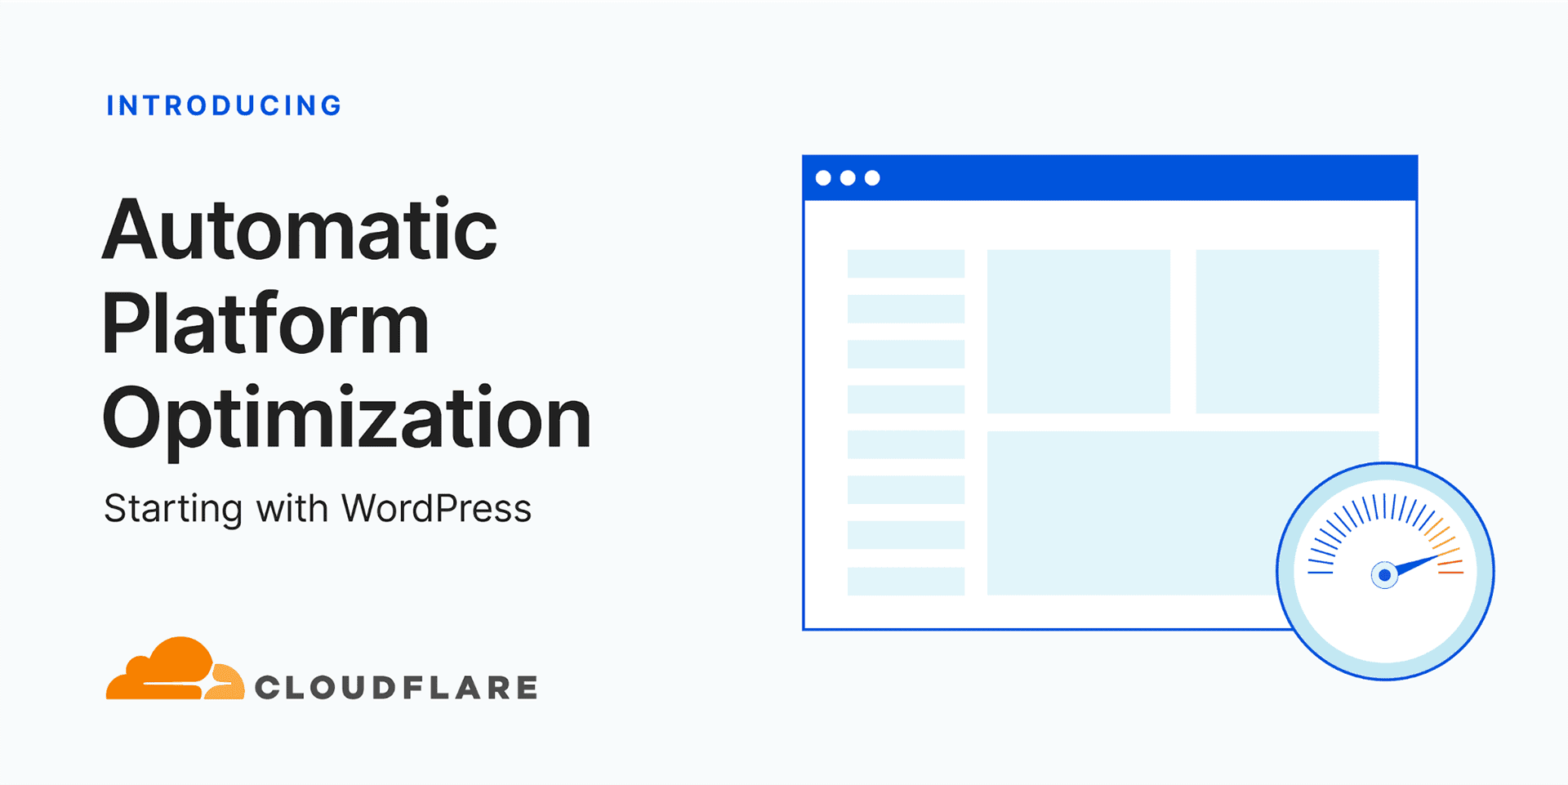 CloudFlare Launches Automatic Platform Optimization For WordPress